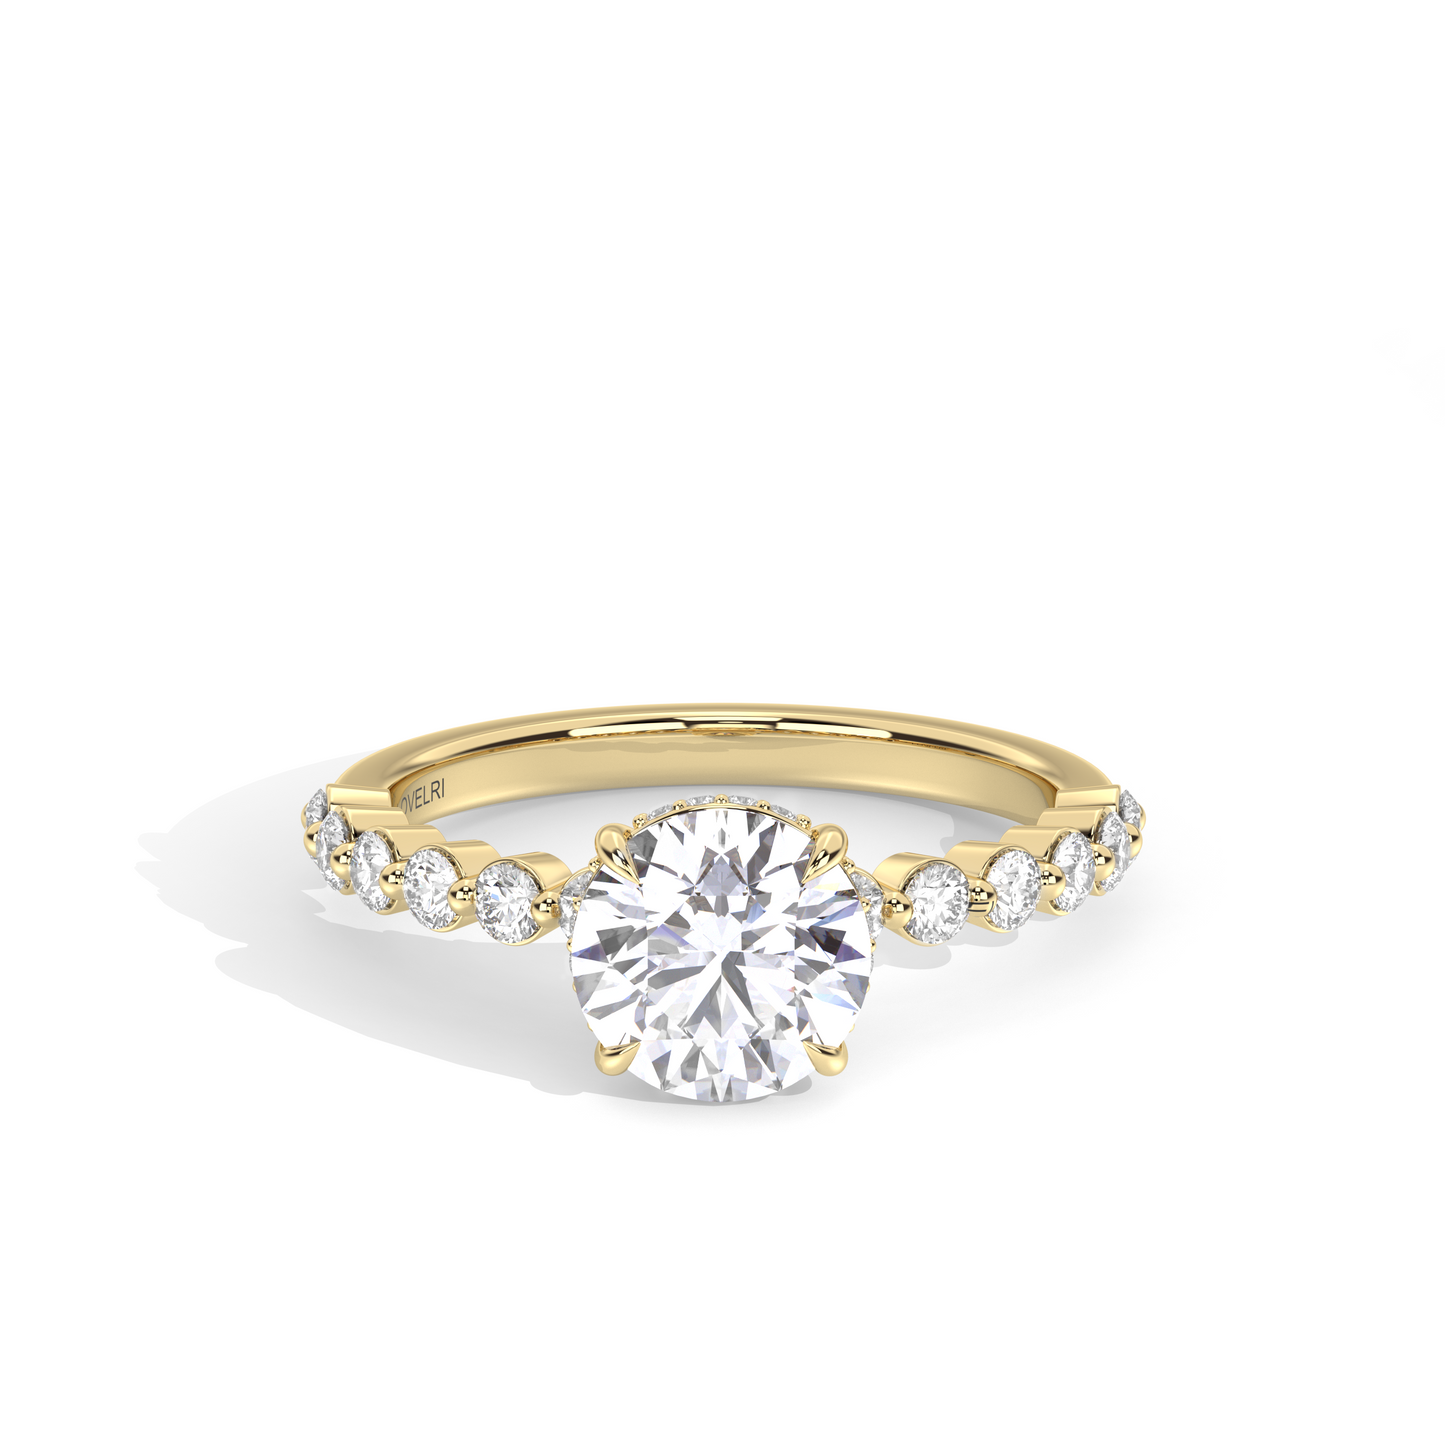 Front View - Scalloped Band Round Engagement Ring Yellow Gold